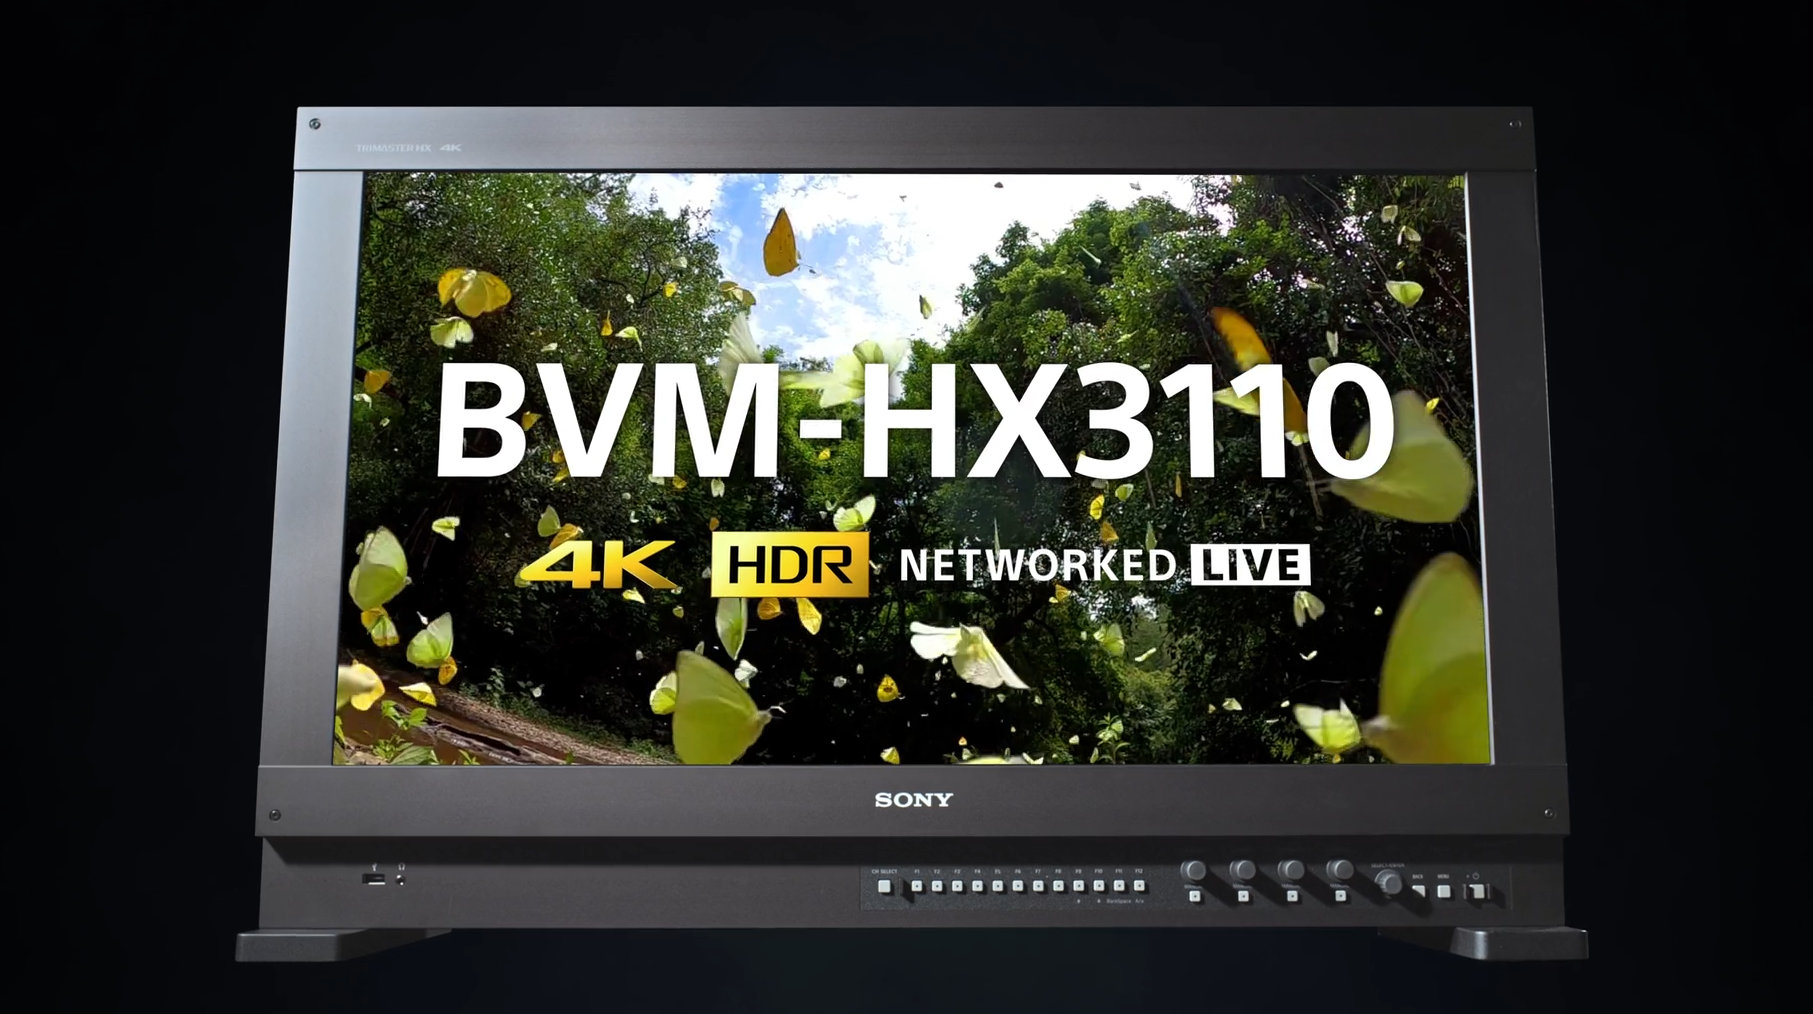 Sony shows reference flagship 4K HDR monitor BVM-HX3110 - 4,000 nits peak